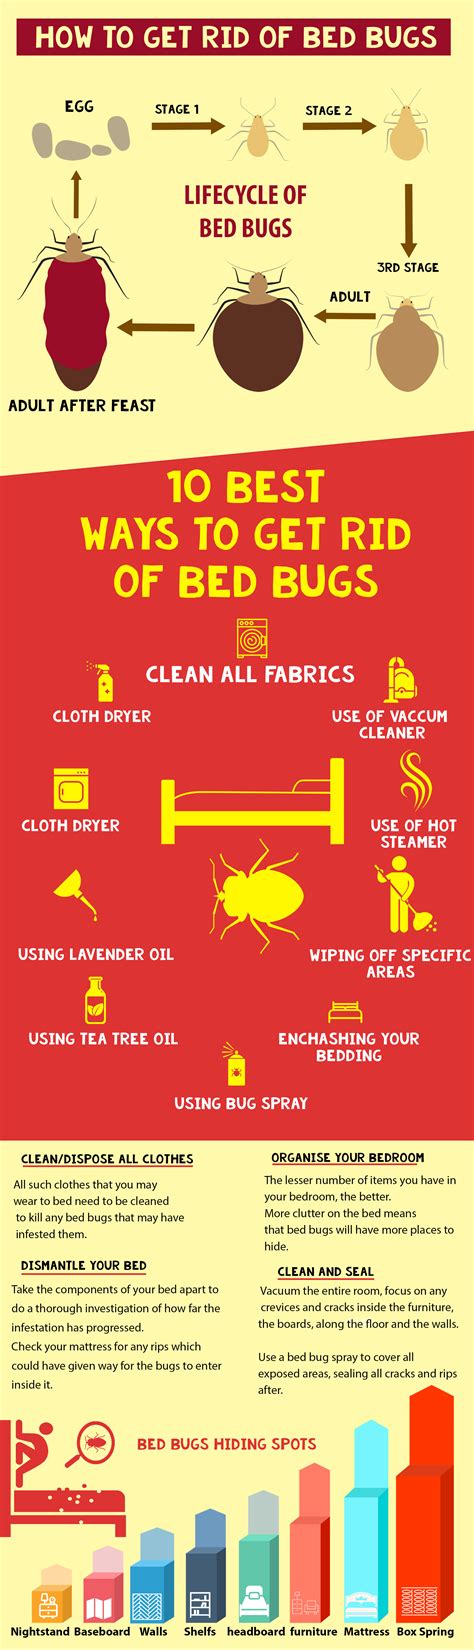 tips     rid  bed bugs rinfographics